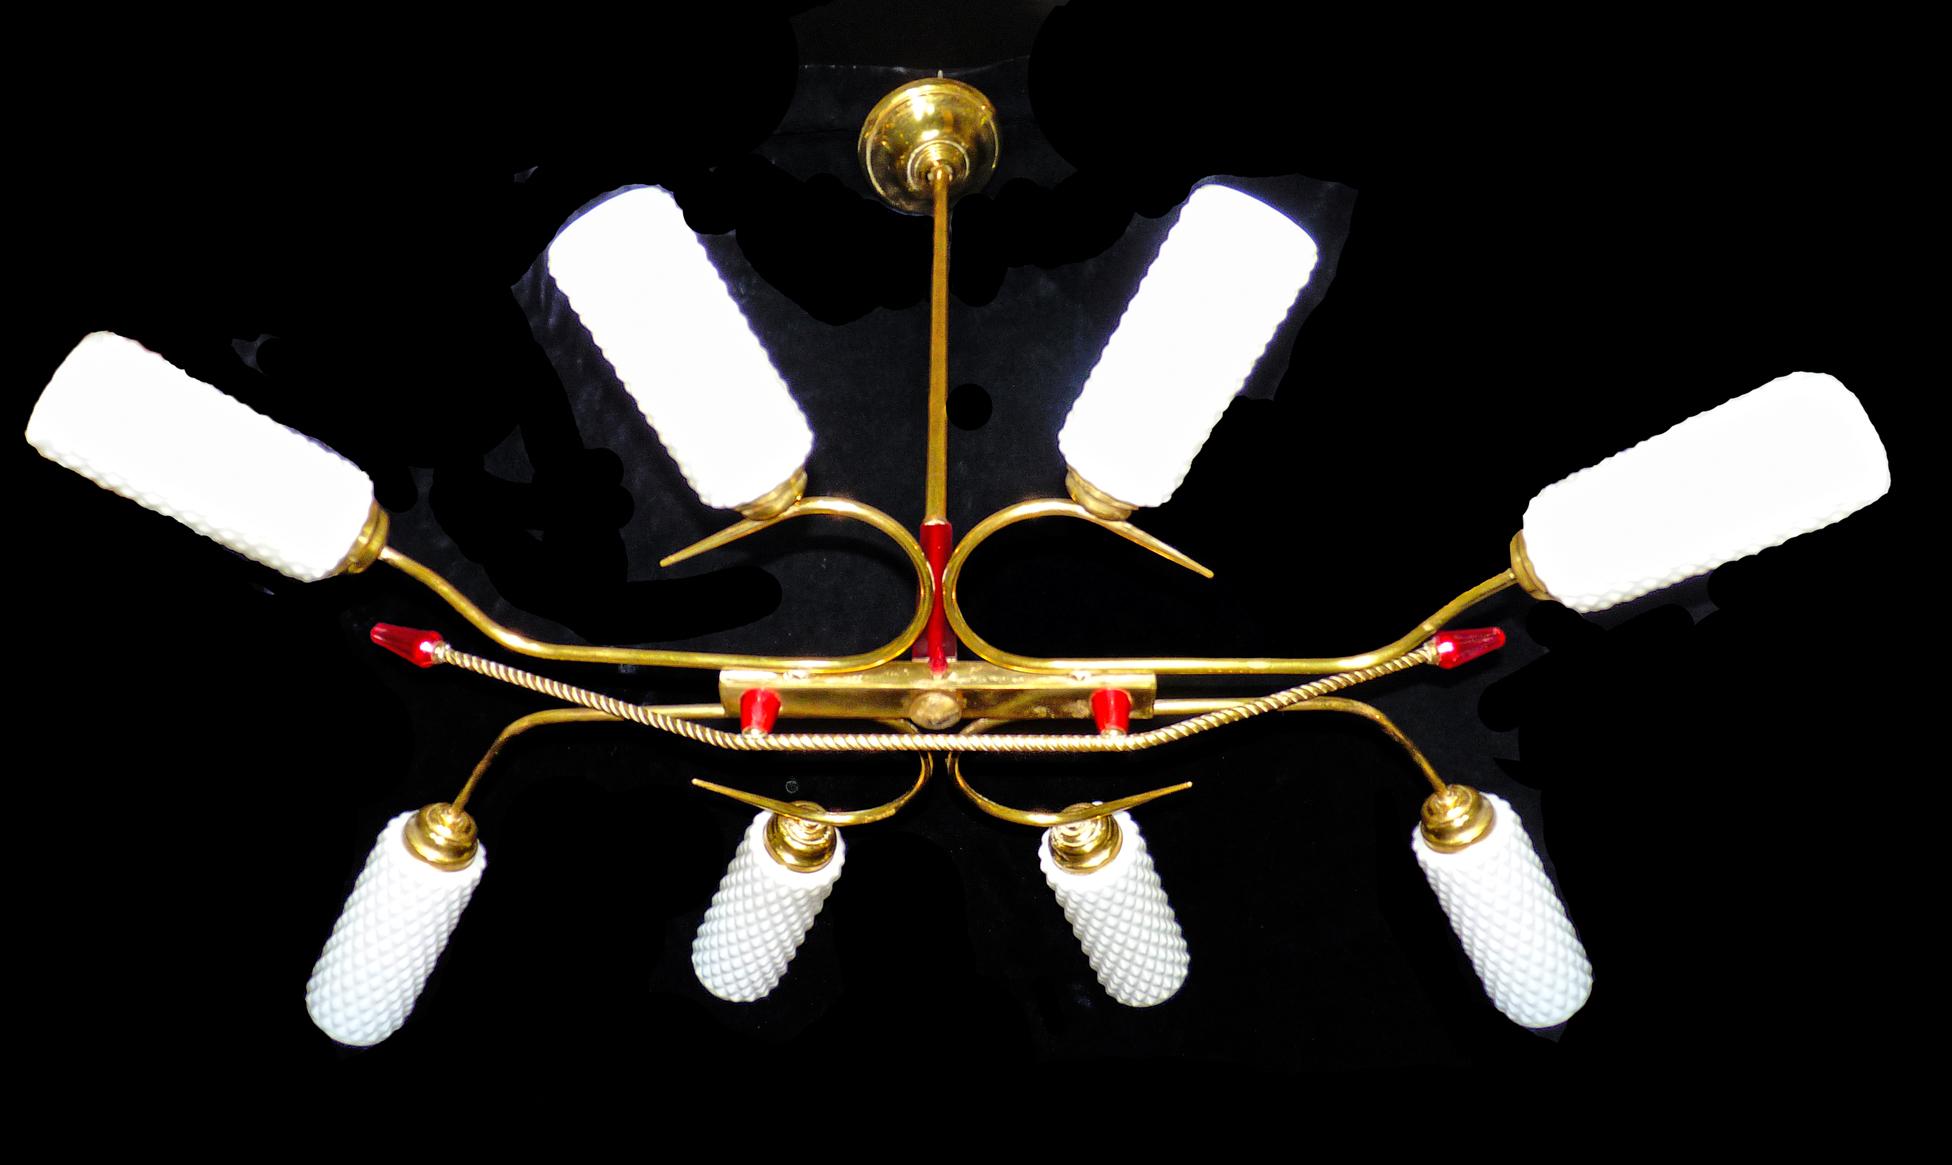 Rare gorgeous large sculptural French Mid-Century Modernist French Art Deco attributed to Maison Lunel, gilt brass and ruby red Lucite Sputnik chandelier with eight lights/ circa 1960, Stilnovo Gio Ponti era
Measures:
Width 36 in / 90 cm
Height